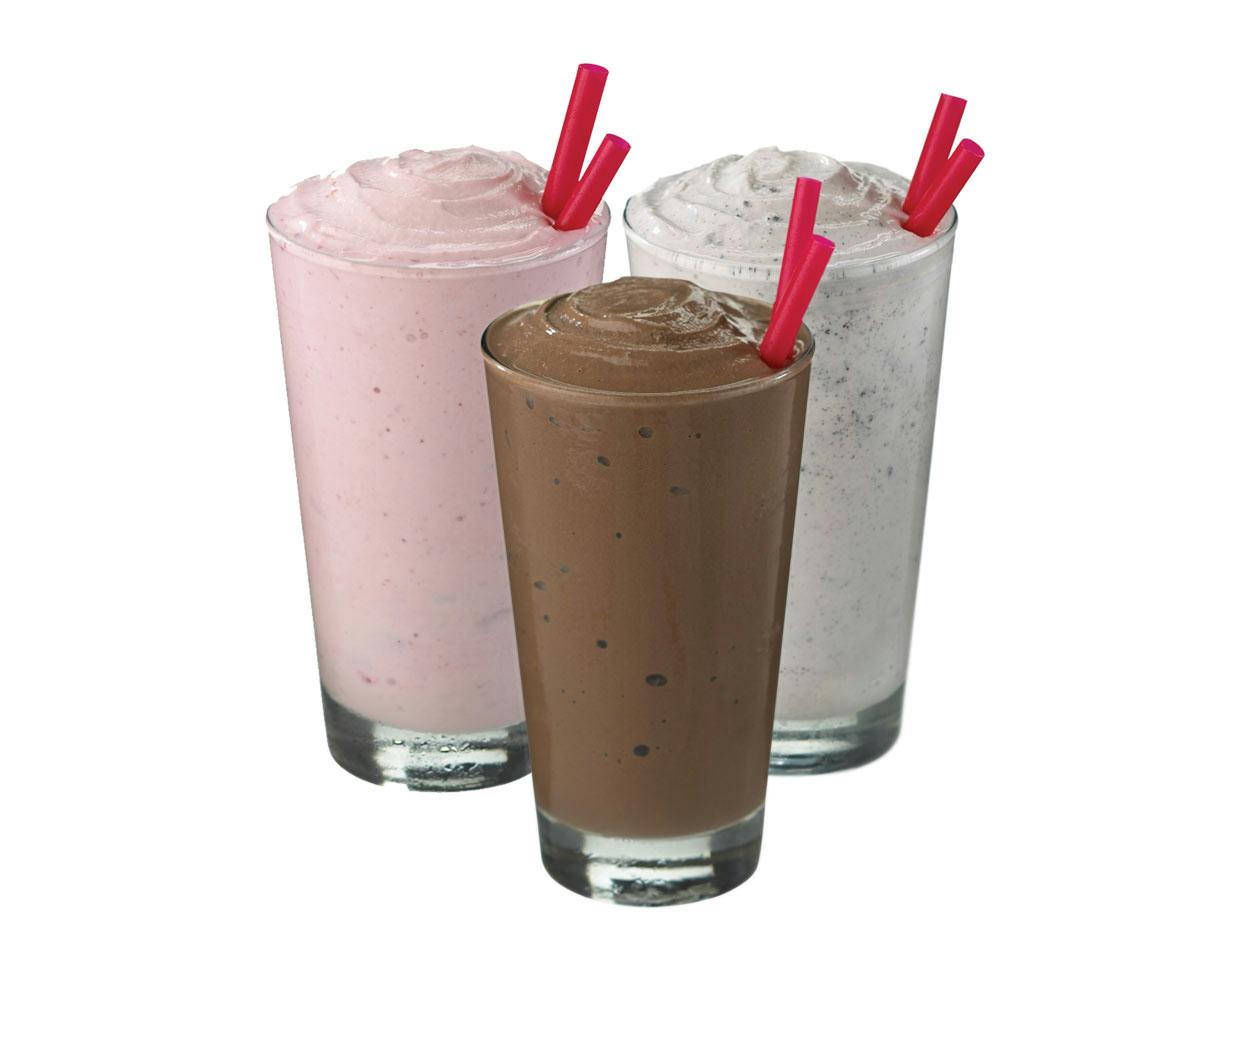 Create Your Own Shake from Cold Stone Creamery - Green Bay in Green Bay, WI